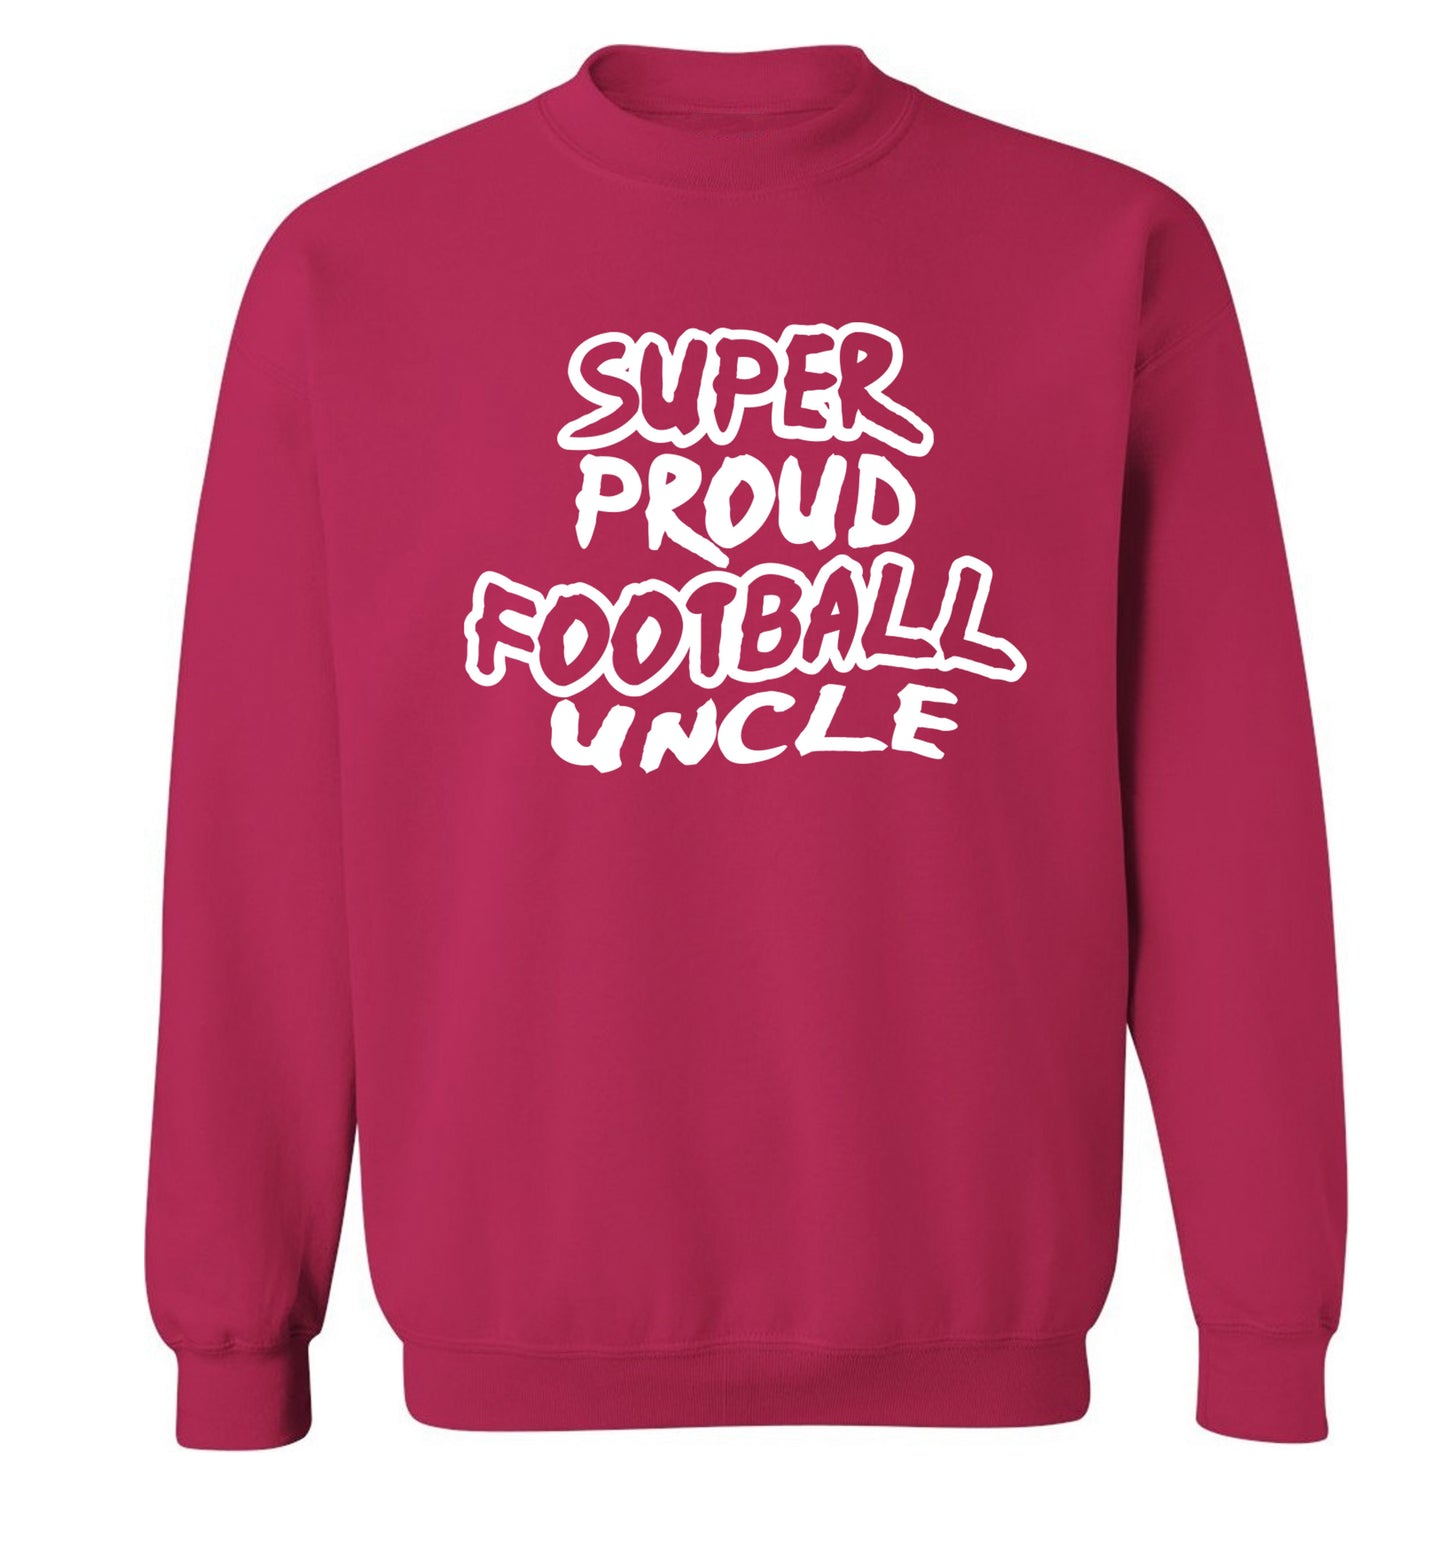 Super proud football uncle Adult's unisexpink Sweater 2XL